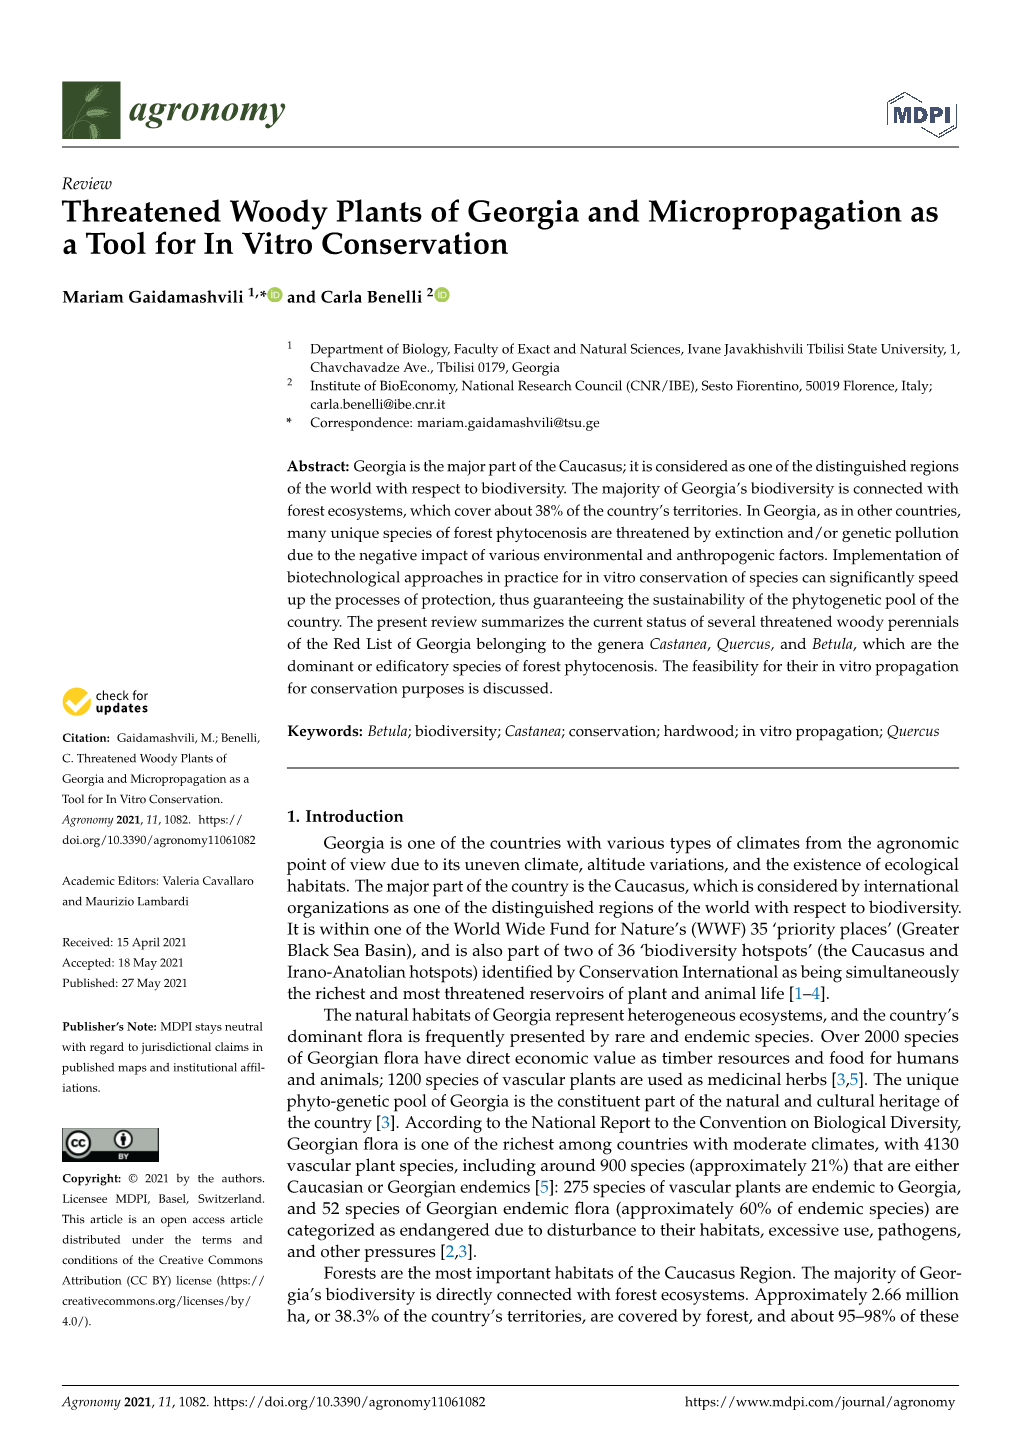 Threatened Woody Plants of Georgia and Micropropagation As a Tool for in Vitro Conservation